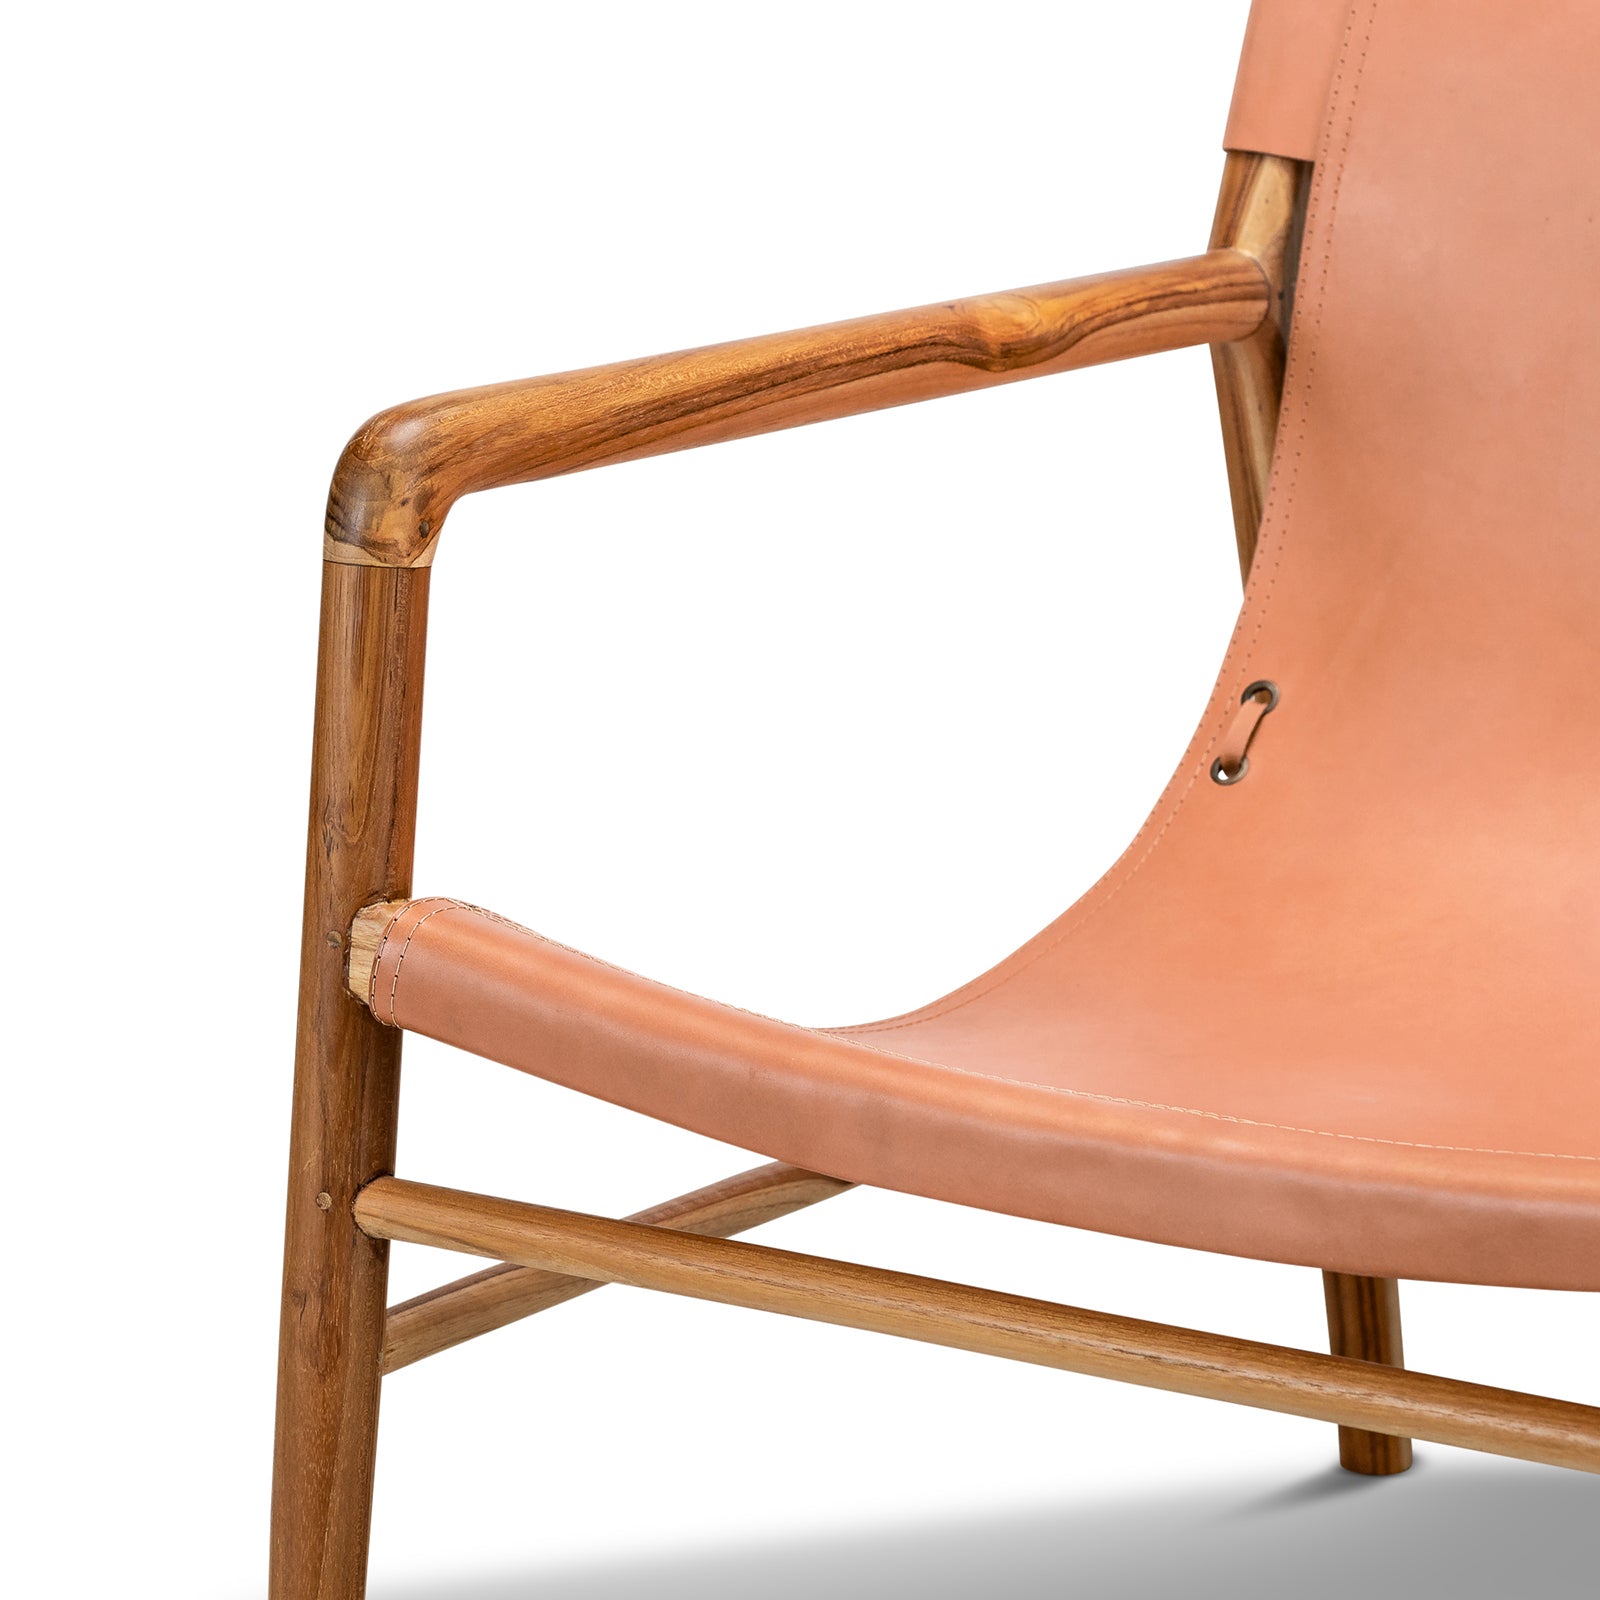 Shore Leather Sling Chair - Natural Tan